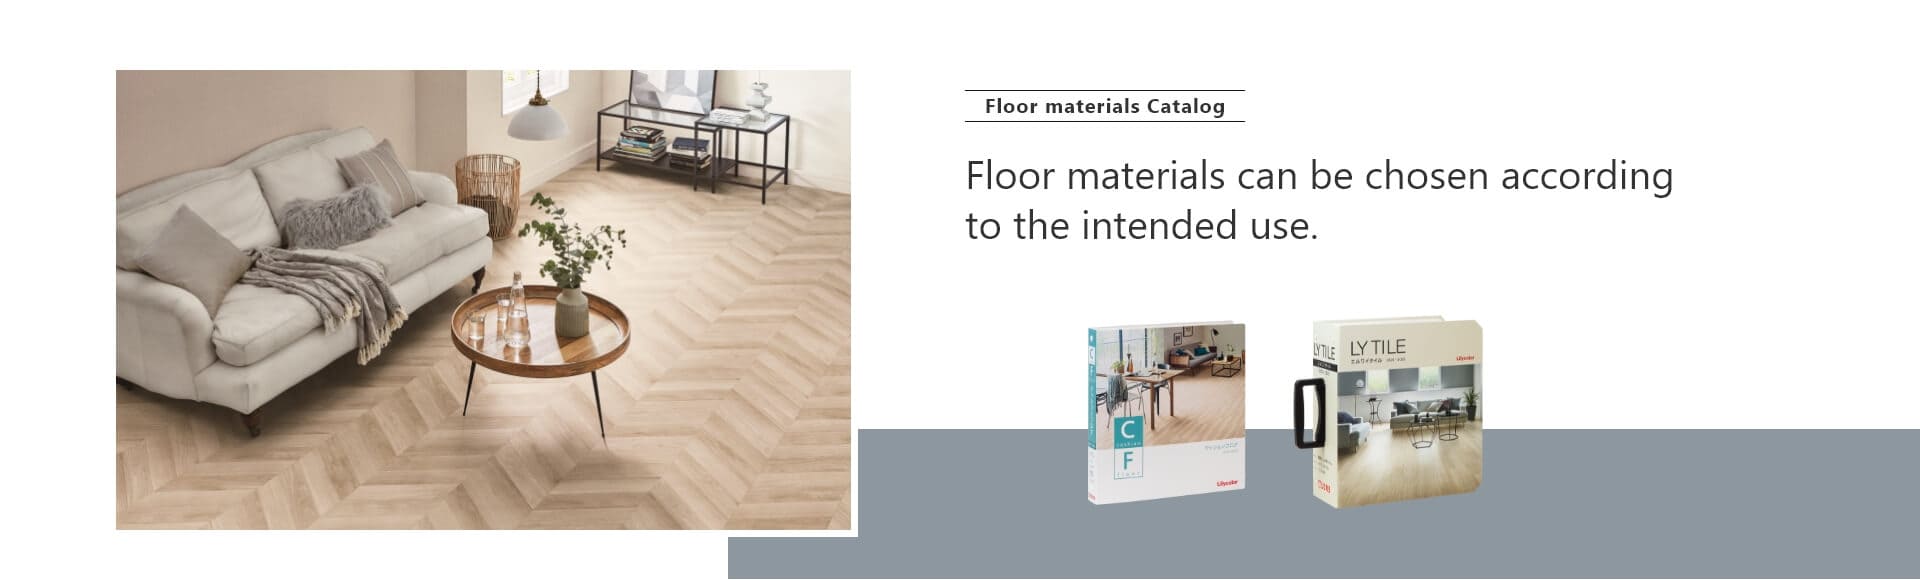 Floor materials Catalog: Floor materials can be chosen according to the intended use.